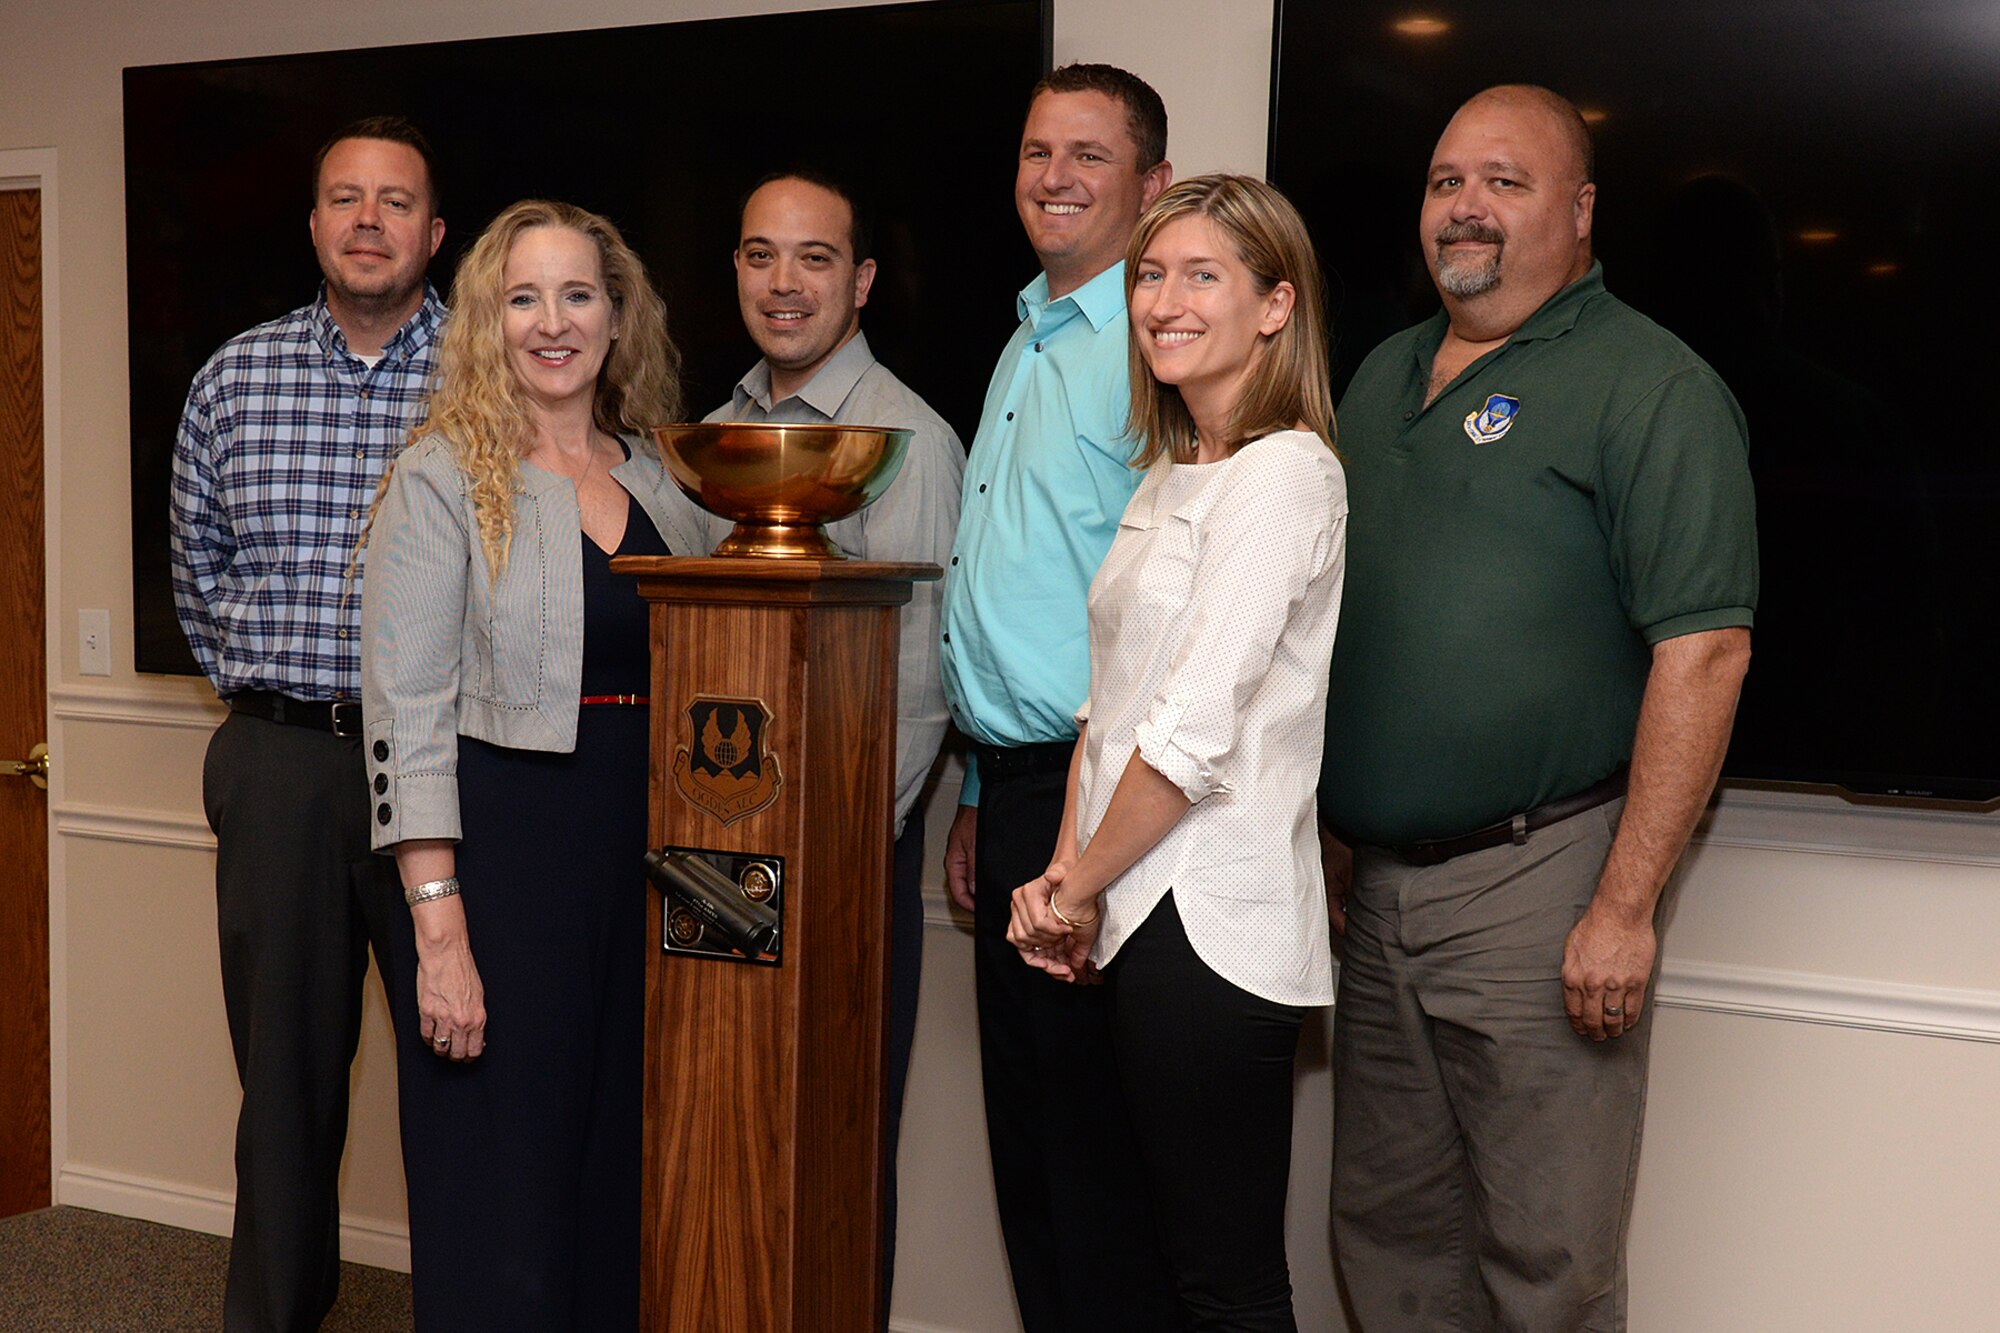 Aerospace Sustainment Directorate team members (left to right) Rich Kuykendall, Cathy Barker, Adam Payne, Braeden Stander, Jeni Owen and Lance Haycock receive the Logistics Airmen Mastering Possibilities, or L-A-M-P, Award trophy June 6, 2019, at Hill Air Force Base, Utah. The award established in January includes a traveling trophy and is presented monthly to the Ogden Air Logistic Complex’s most deserving team or unit. (U.S. Air Force photo by Alex R. Lloyd)